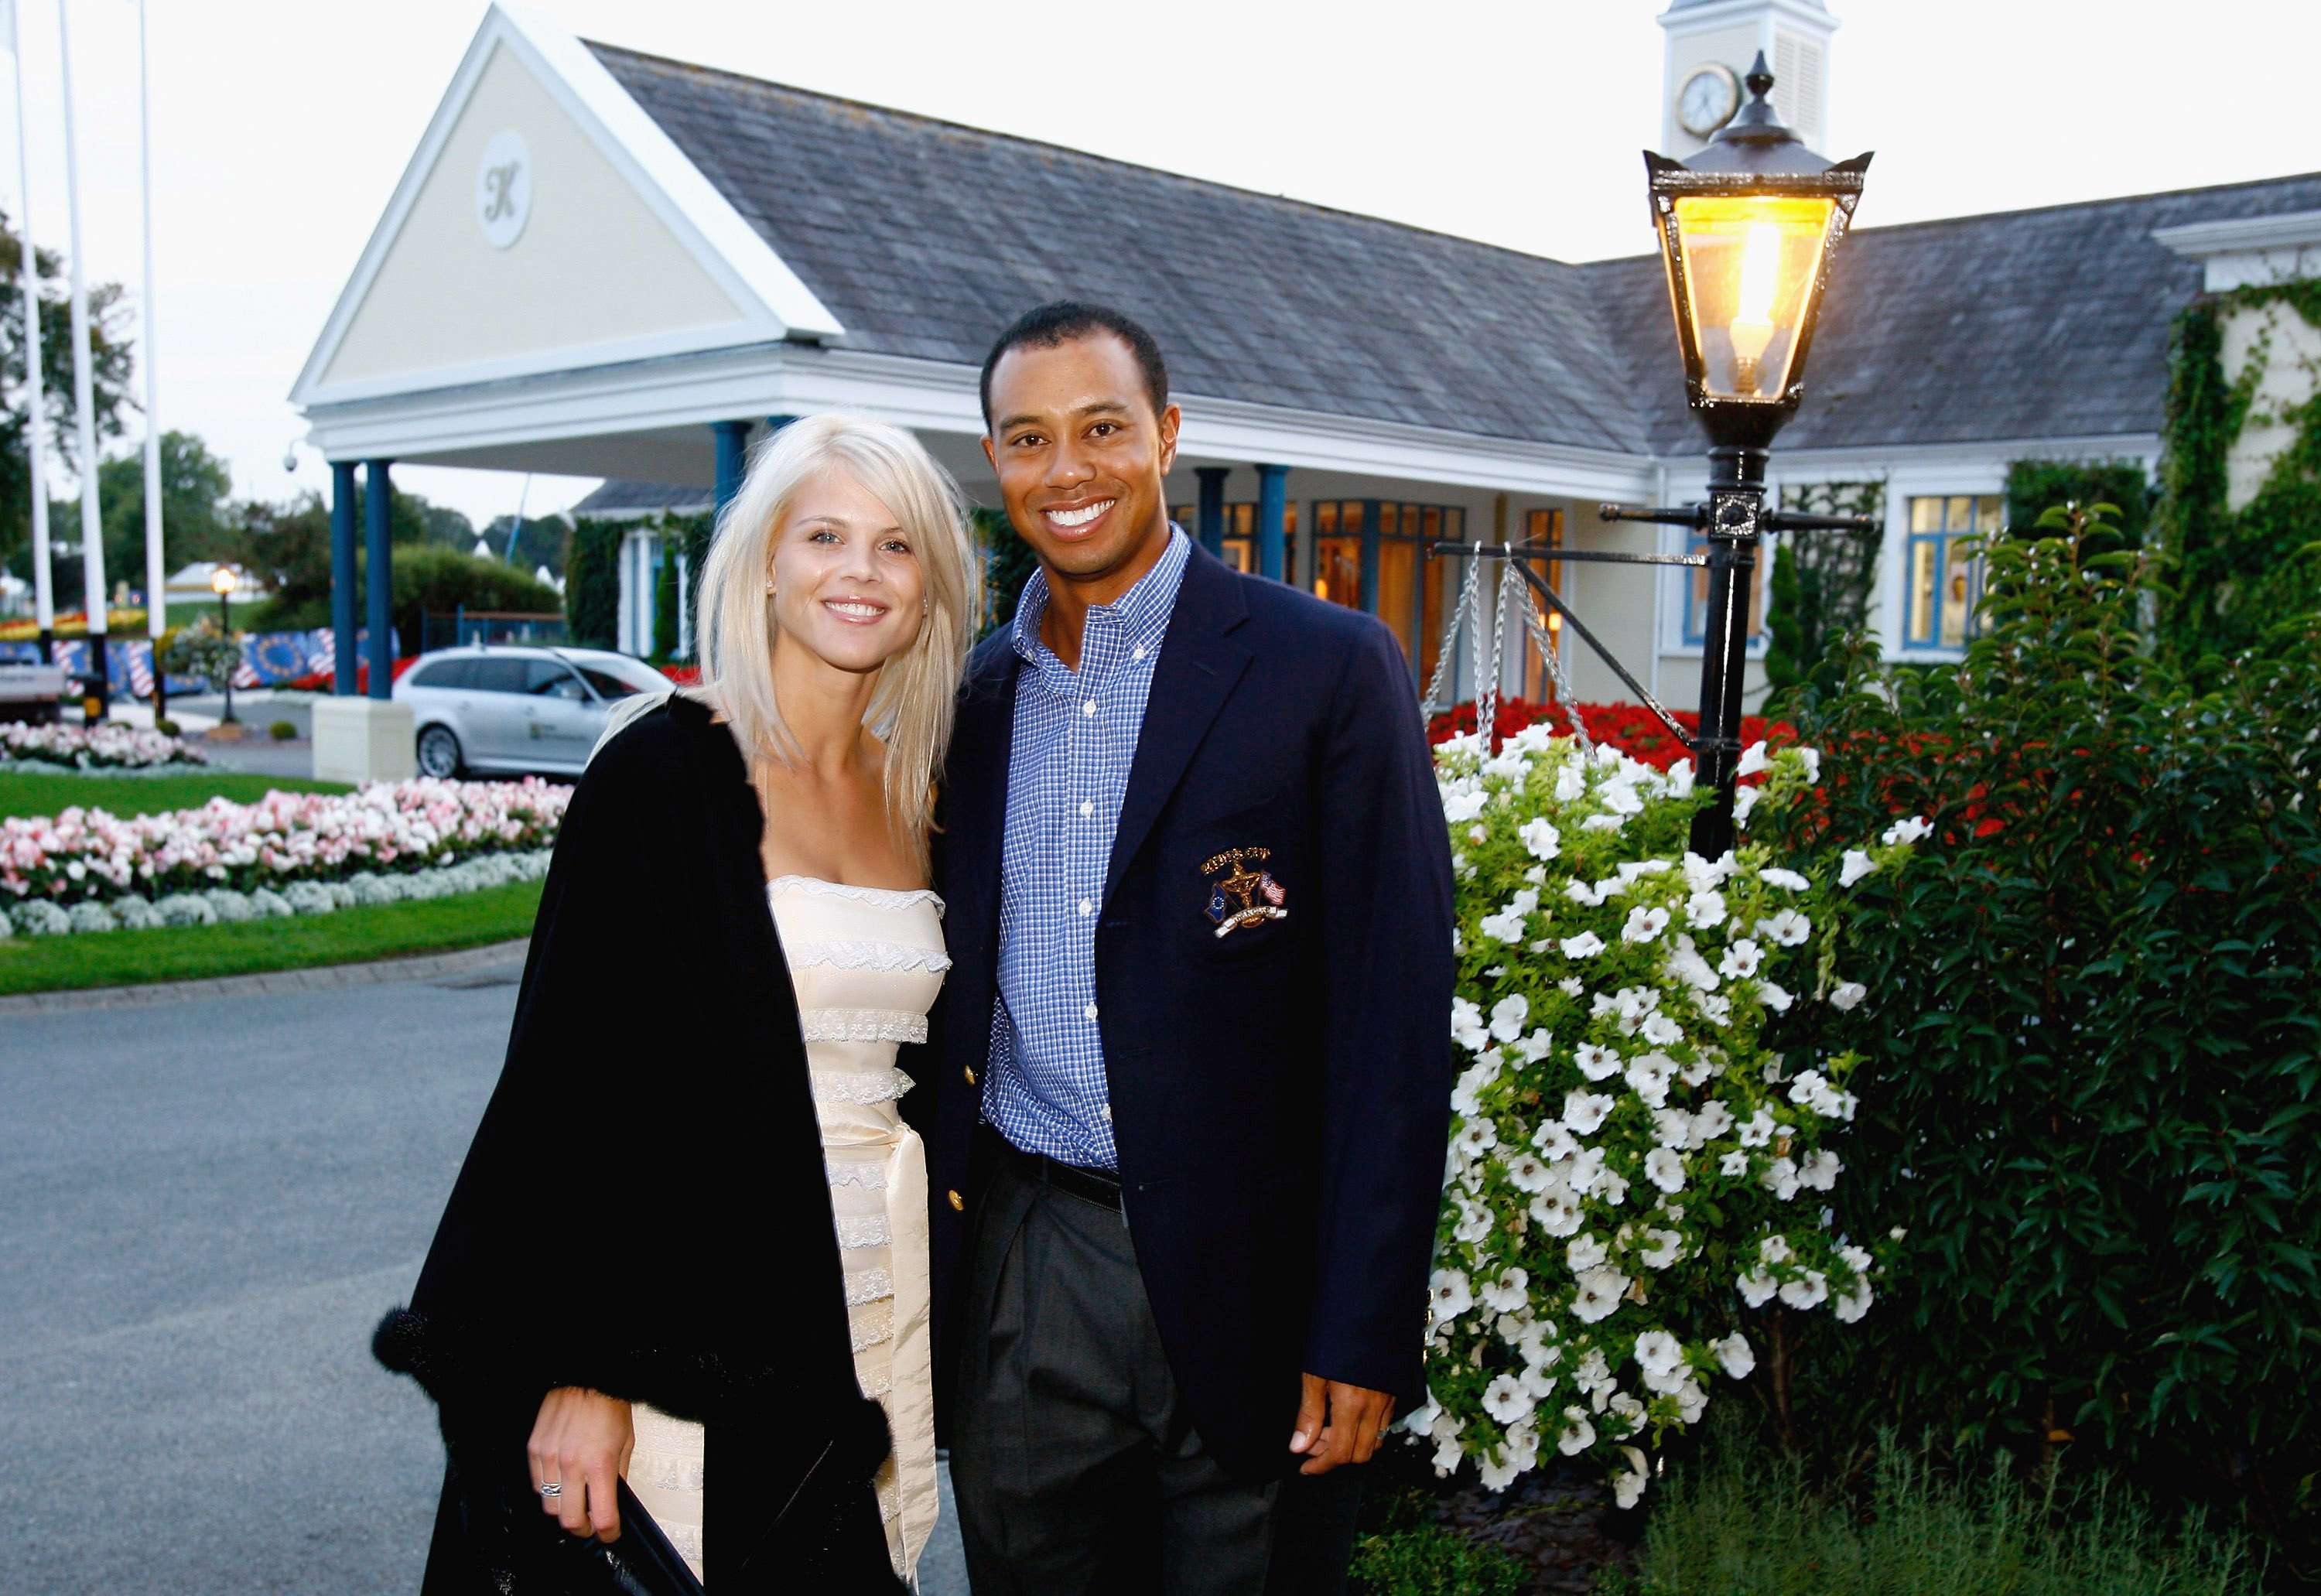 Tiger Woods and Elin Nordegren at The Welcome Dinner after the first official practice day of the 2006 Ryder Cup at The K Club on September 19, 2006, in Straffan, Co. Kildare, Ireland. | Source: Getty Images